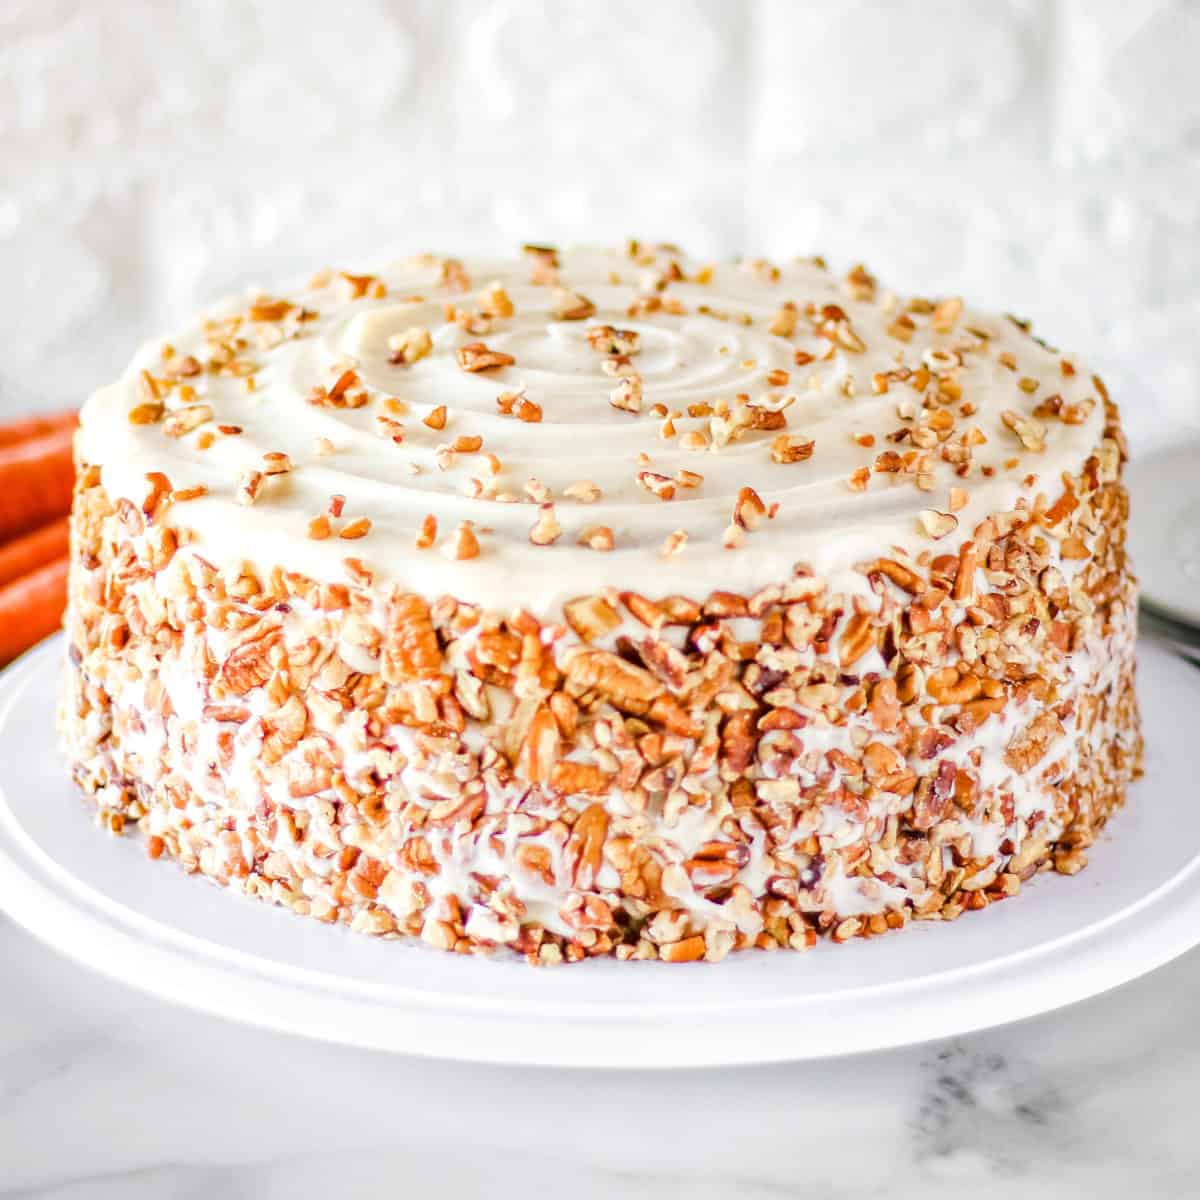 Homemade carrot cake with cream cheese frosting on a white cake platter.